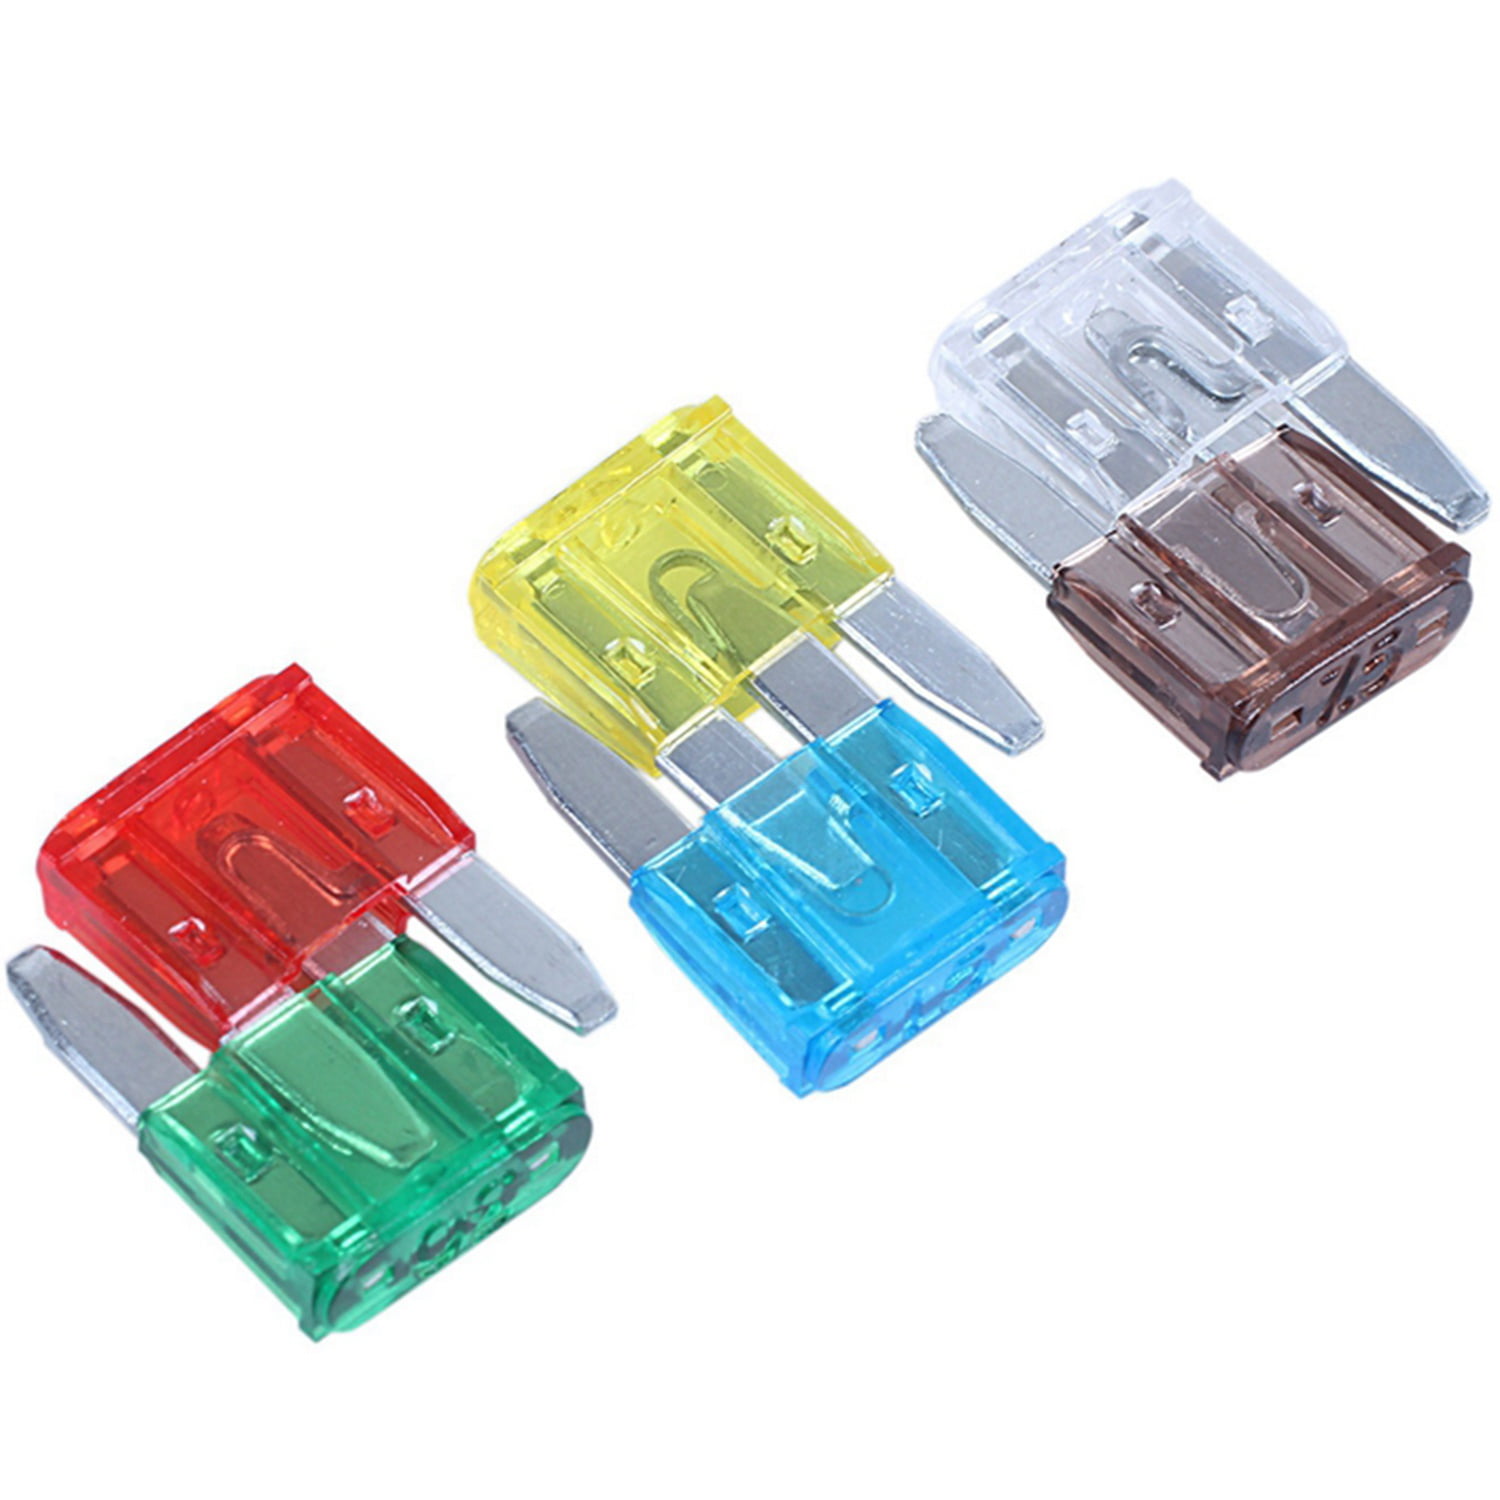 Car Spare 10x Standard Blade Fuses 10 Amp For Fuse Box 